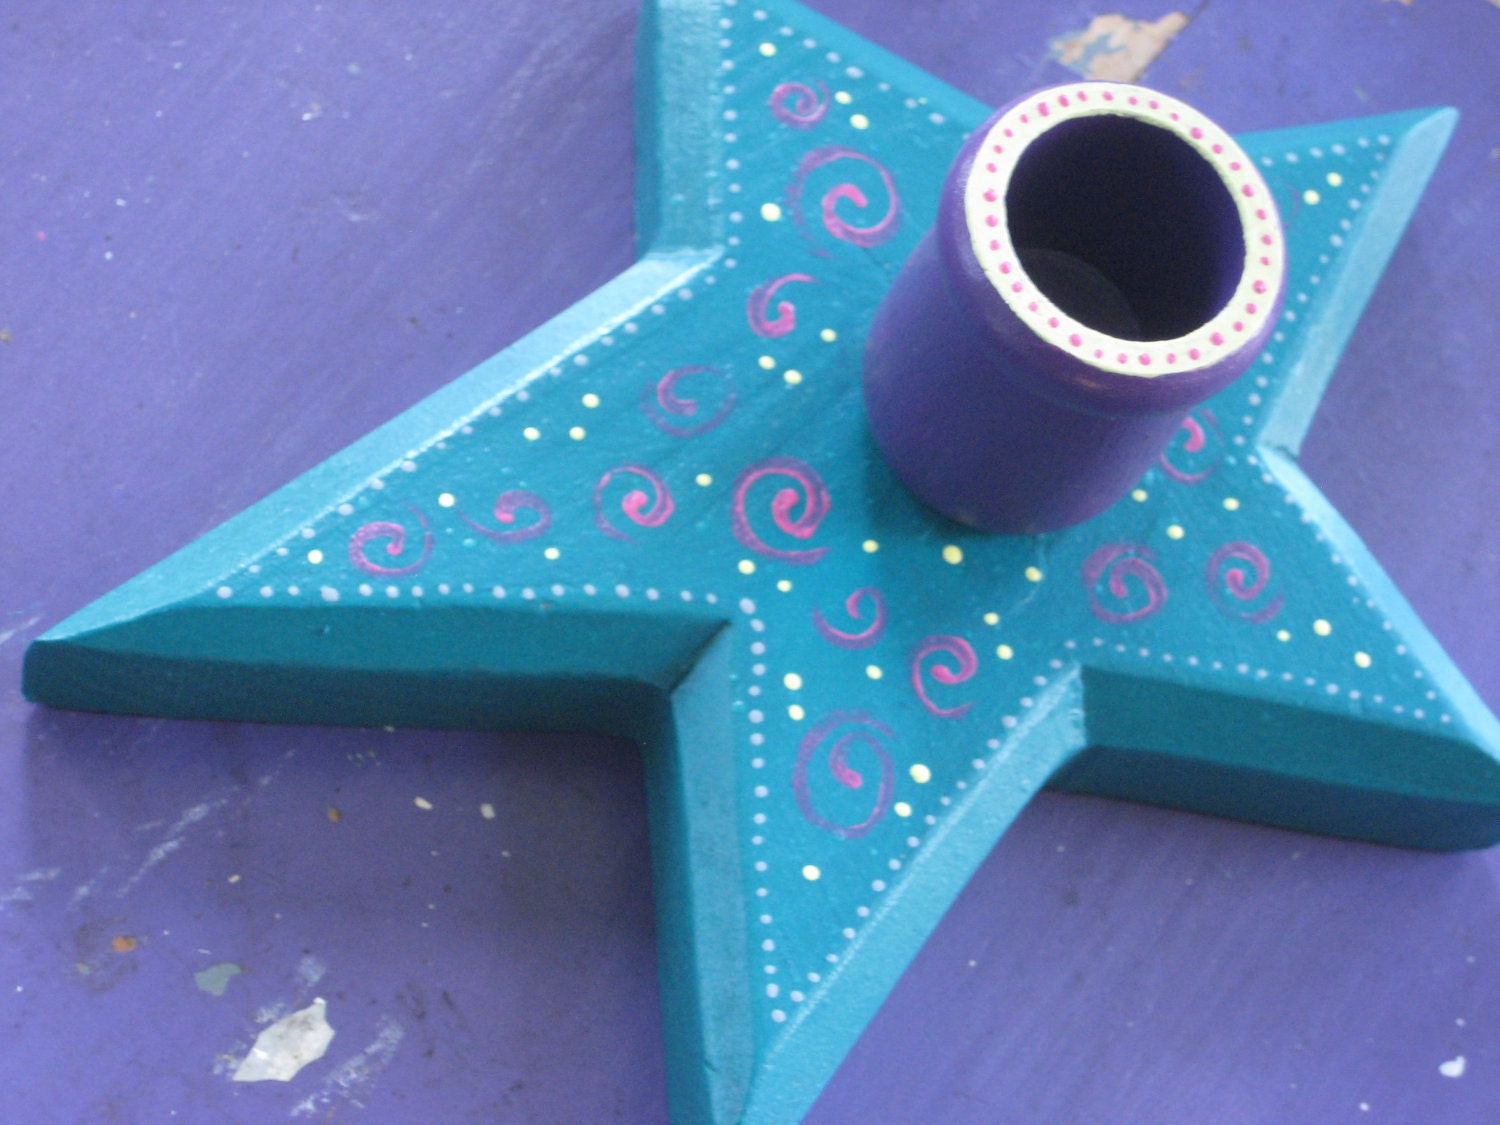 Christmas Star Candle Holder - Teal and Purple - Whimsical Upcycled Folk Art